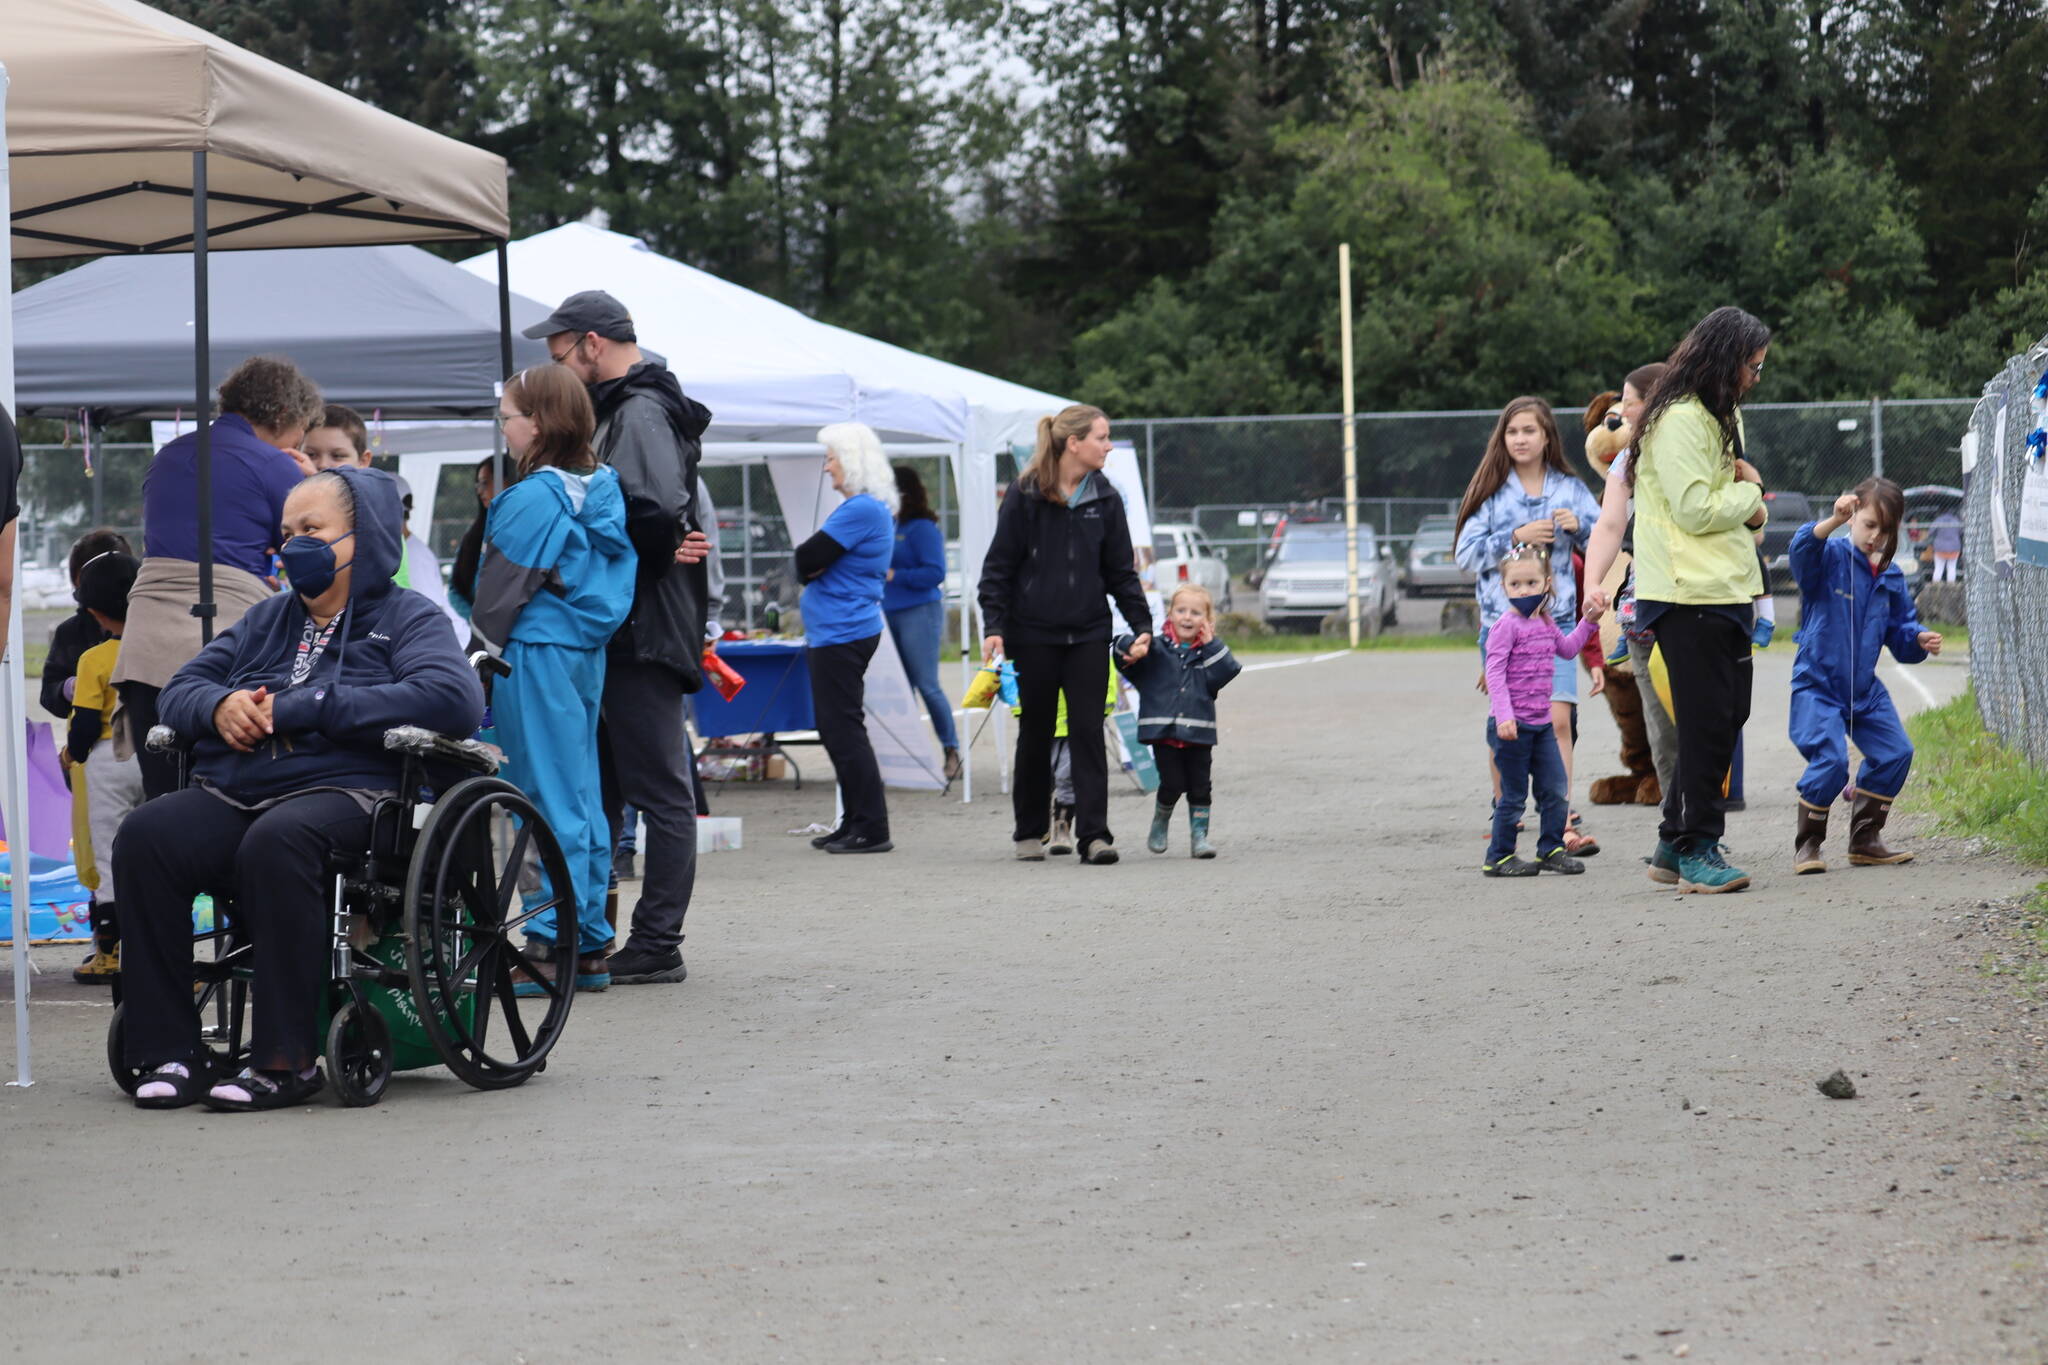 Many families came out to enjoy the fun and also visit with the various community agencies who had booths set up at the SAFE Child Advocacy Center’s first Family Day at the Park on Saturday at the Dimond Park Field House. (Jonson Kuhn / Juneau Empire)